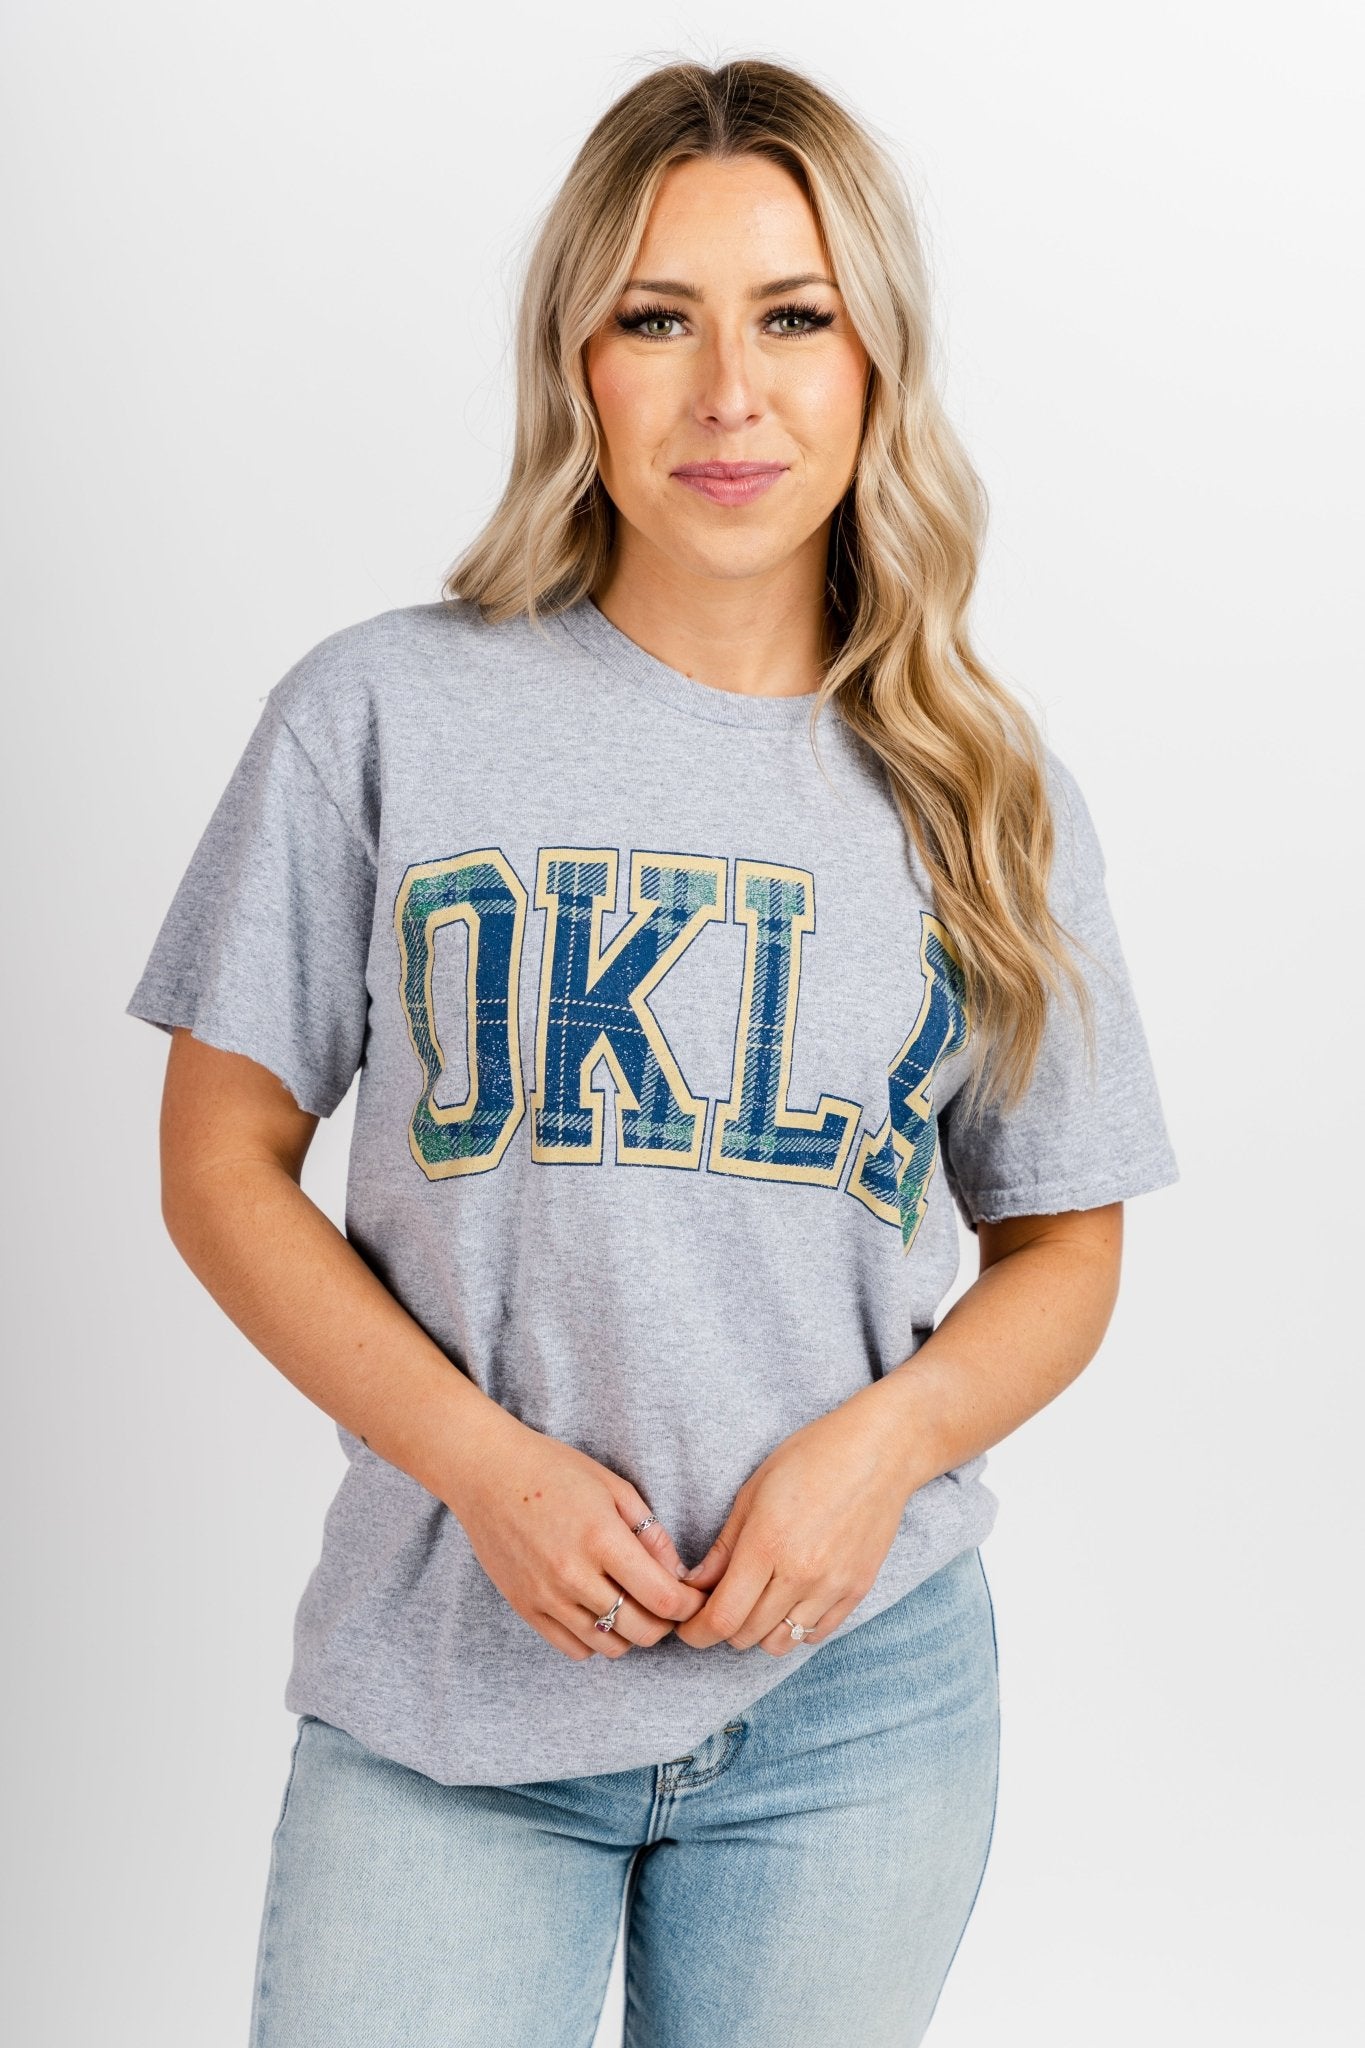 OKLA plaid arch thrifted t-shirt grey - Cute t-shirt - Trendy Graphic T-Shirts at Lush Fashion Lounge Boutique in Oklahoma City